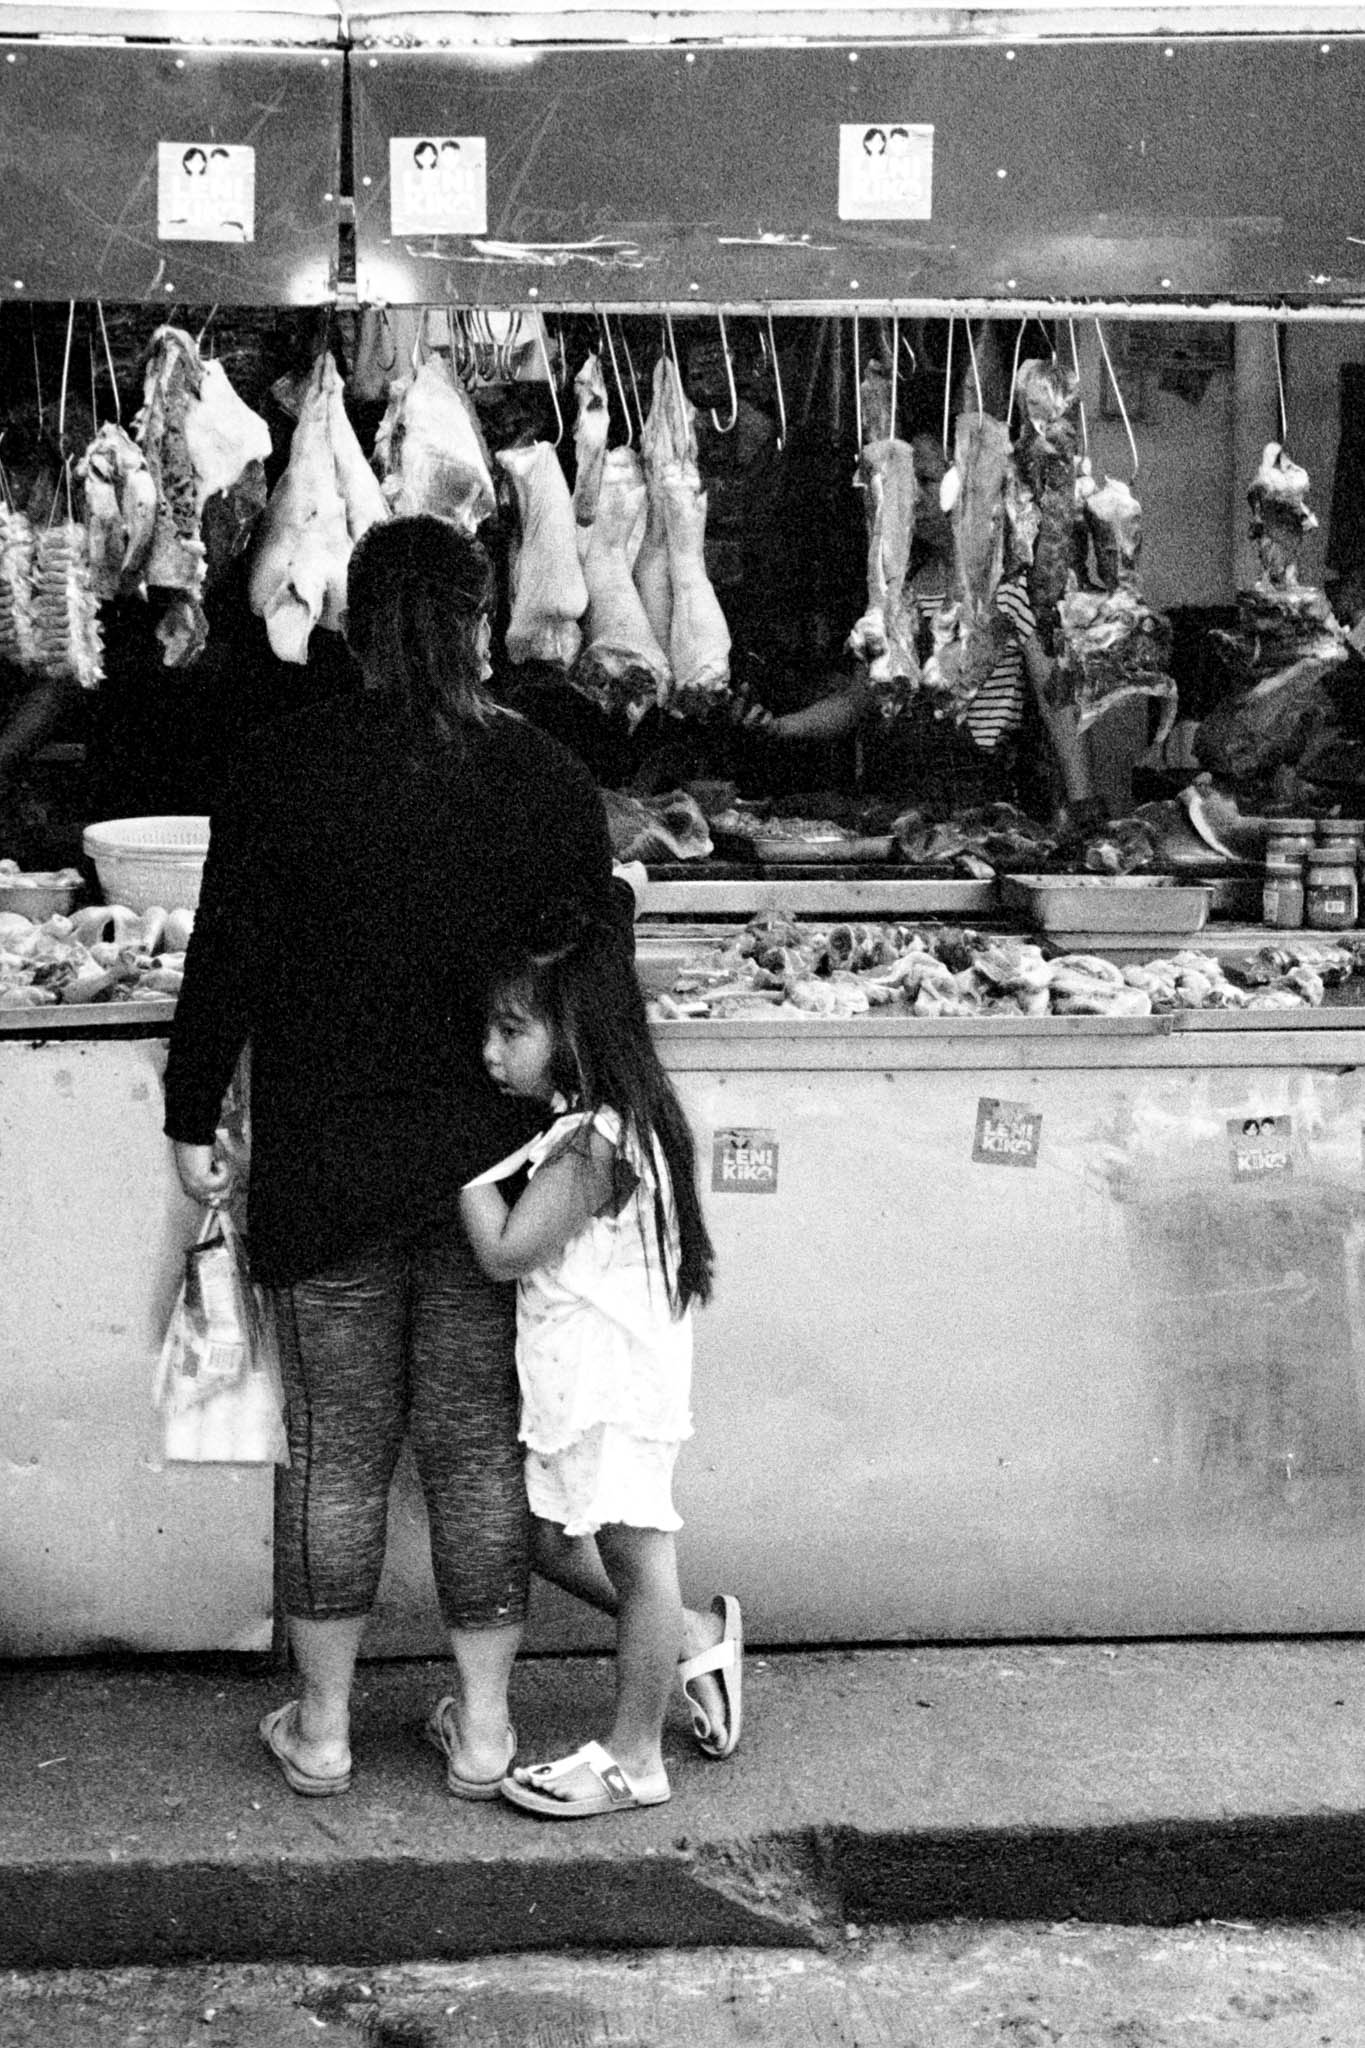 Woman and child buying poultry at a traditional butcher stall in black and white photo.